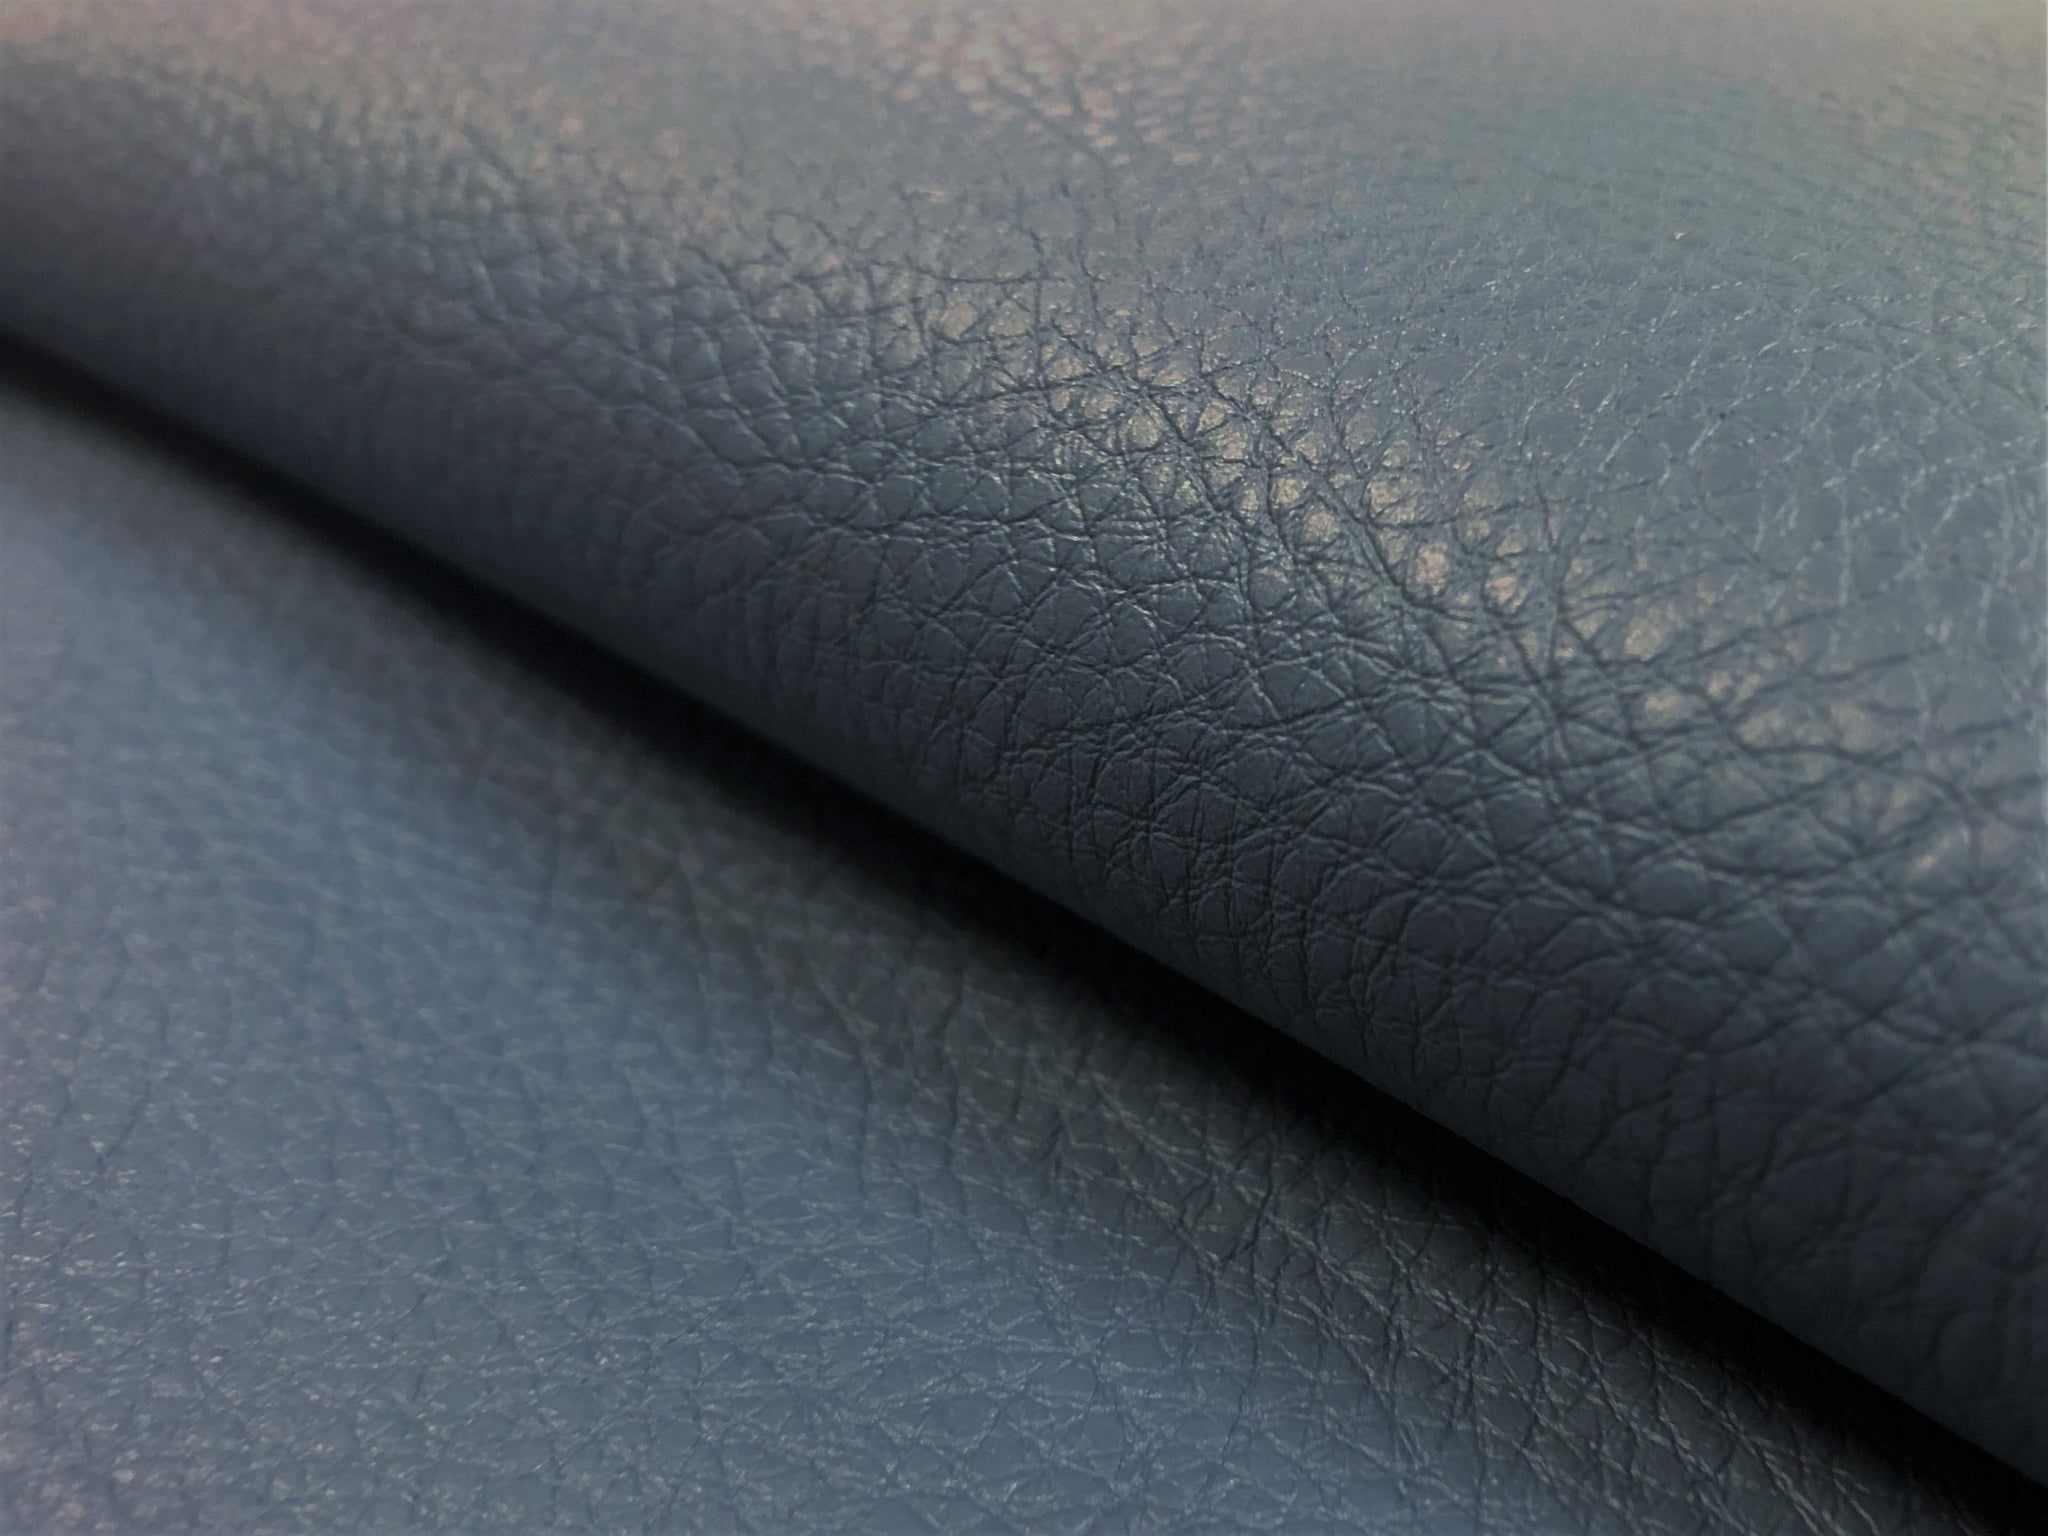 Blue Faux Leather Fabric